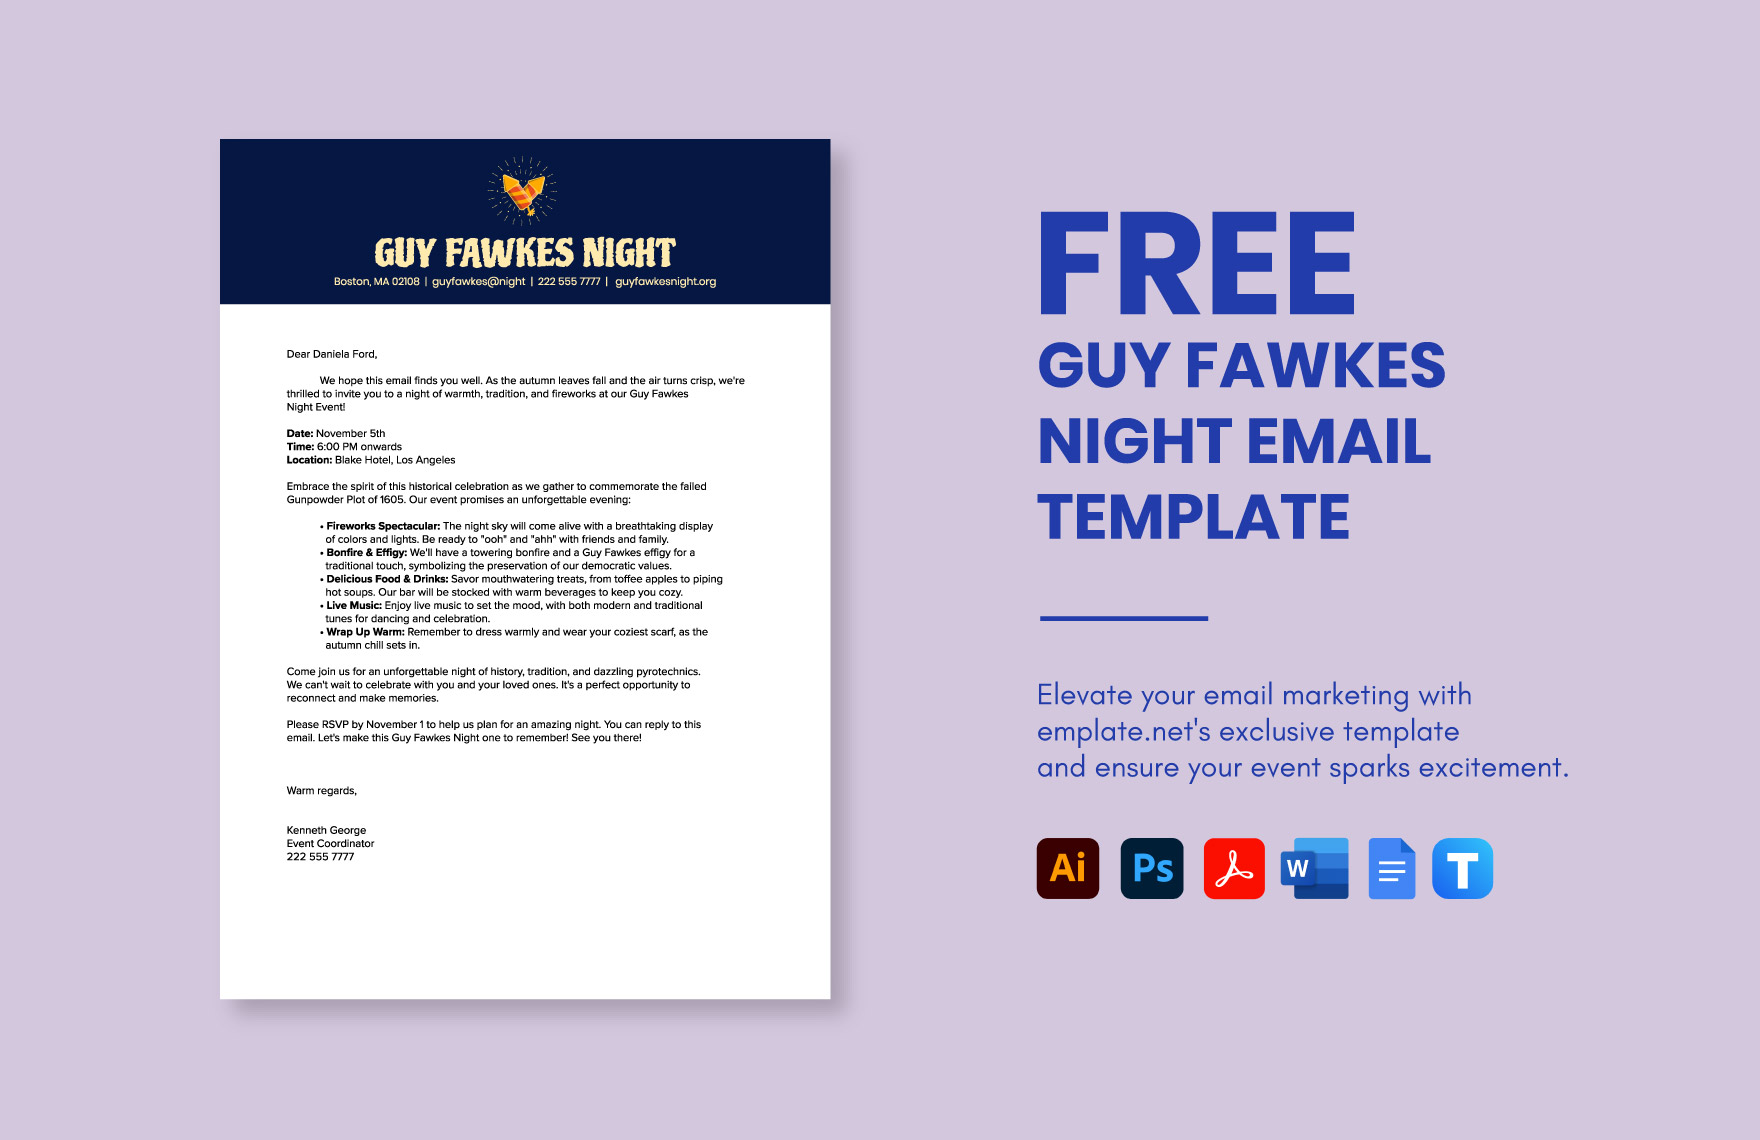 Free Guy Fawkes Night Email Template in Word, Google Docs, PDF, Illustrator, PSD